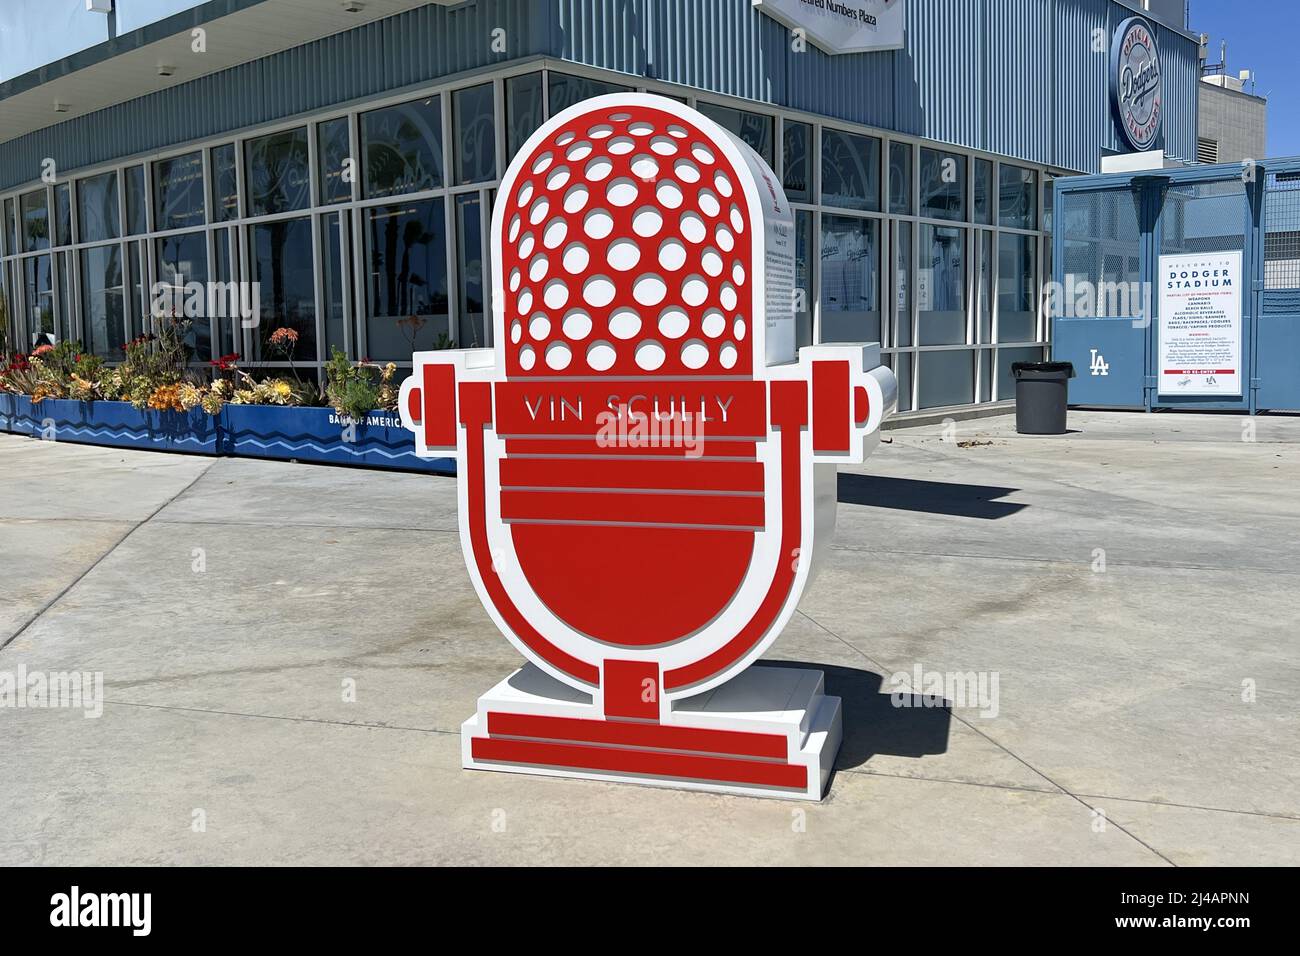 vin scully jersey microphone